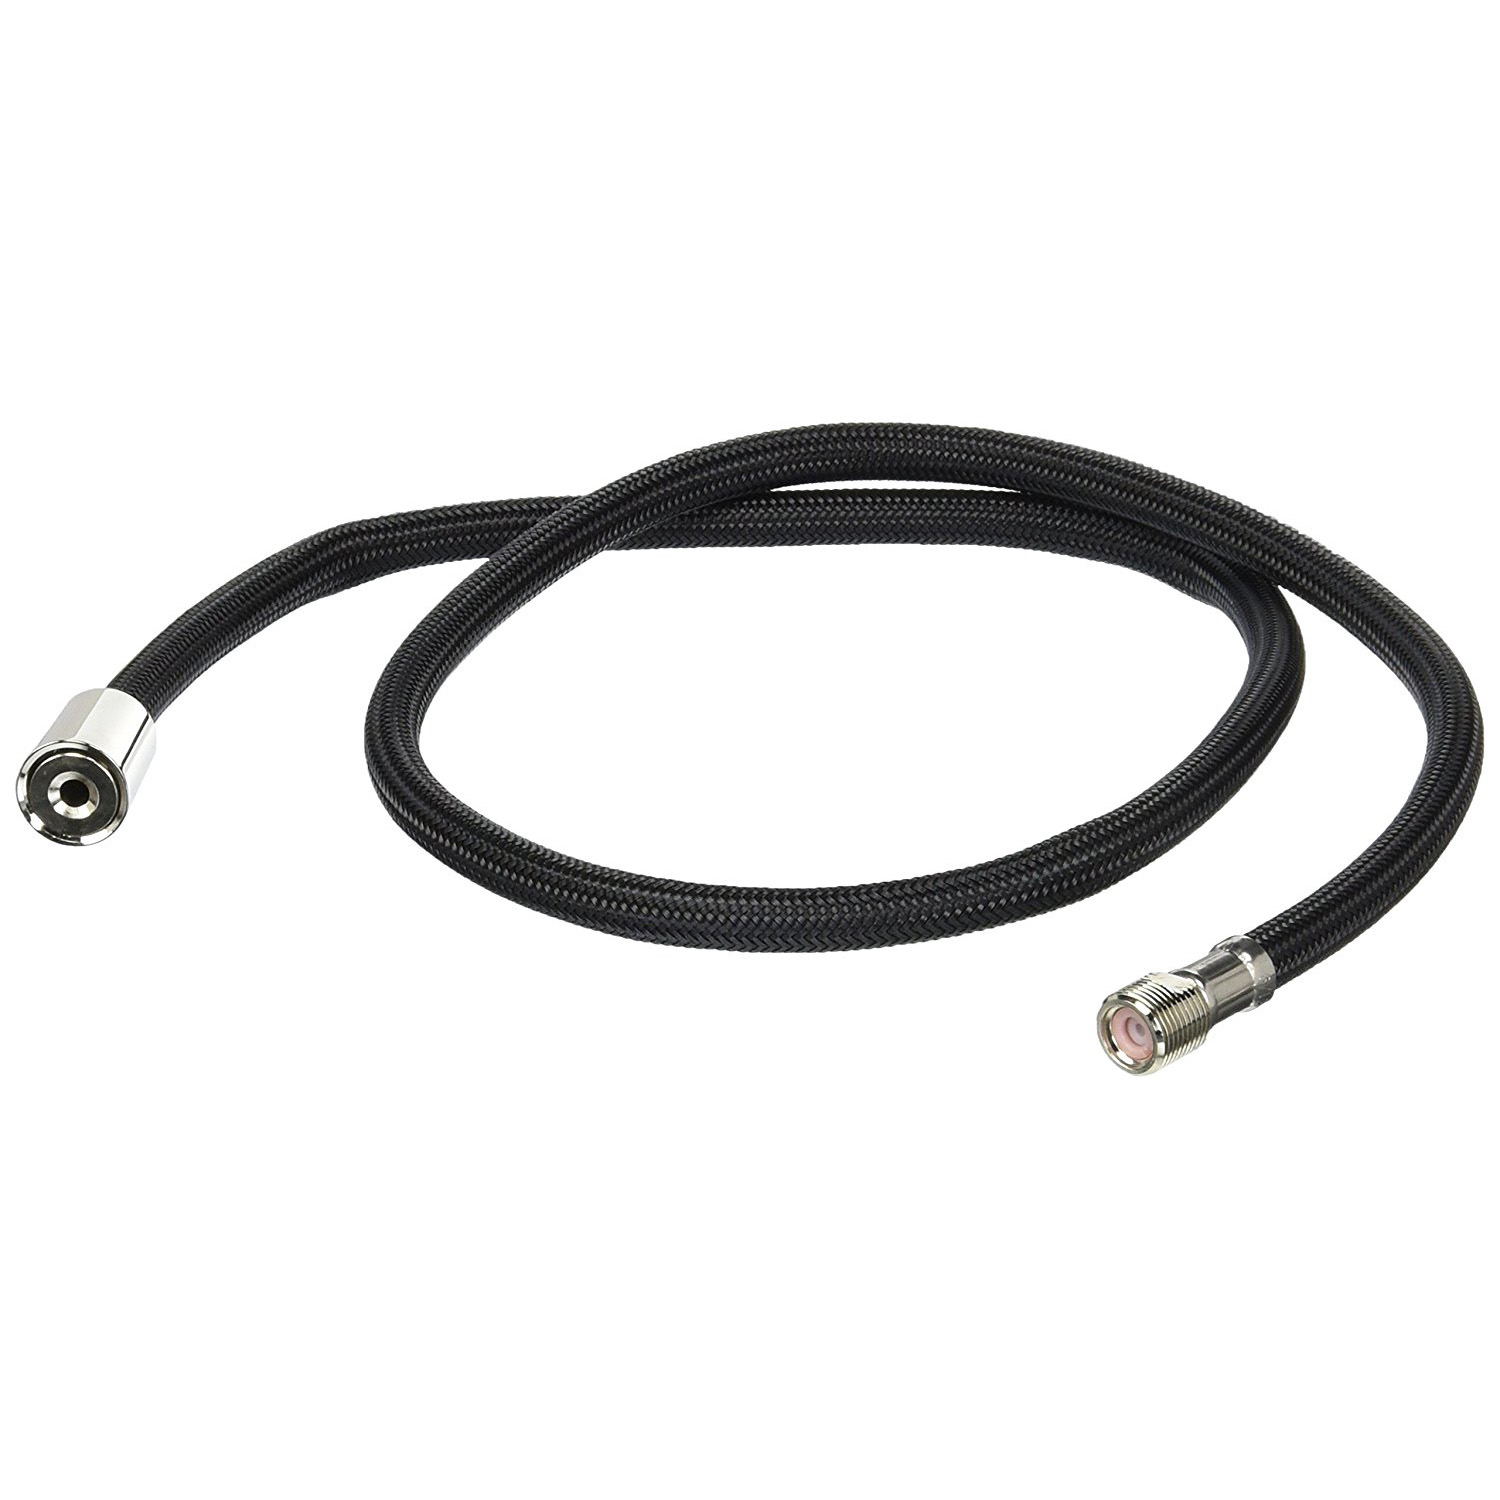 Perrin & Rowe 47" Rinse Hose Black Nylon for Sidespray Kitchen Faucets Polished Nickel